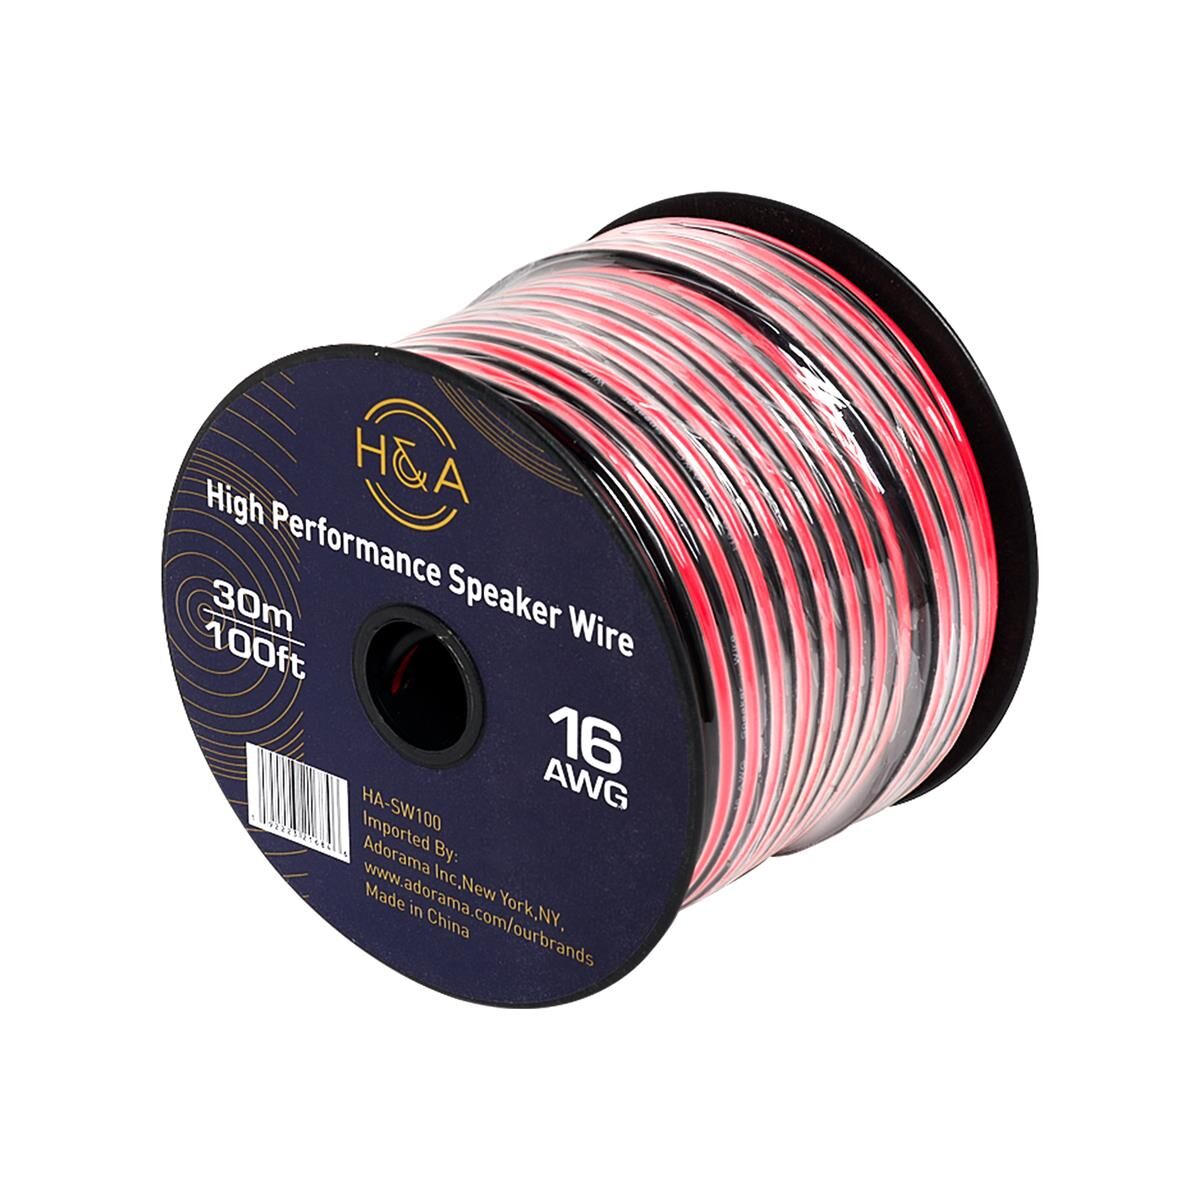 H&amp;A 16 AWG Speaker Wire Cable (100' Spool)